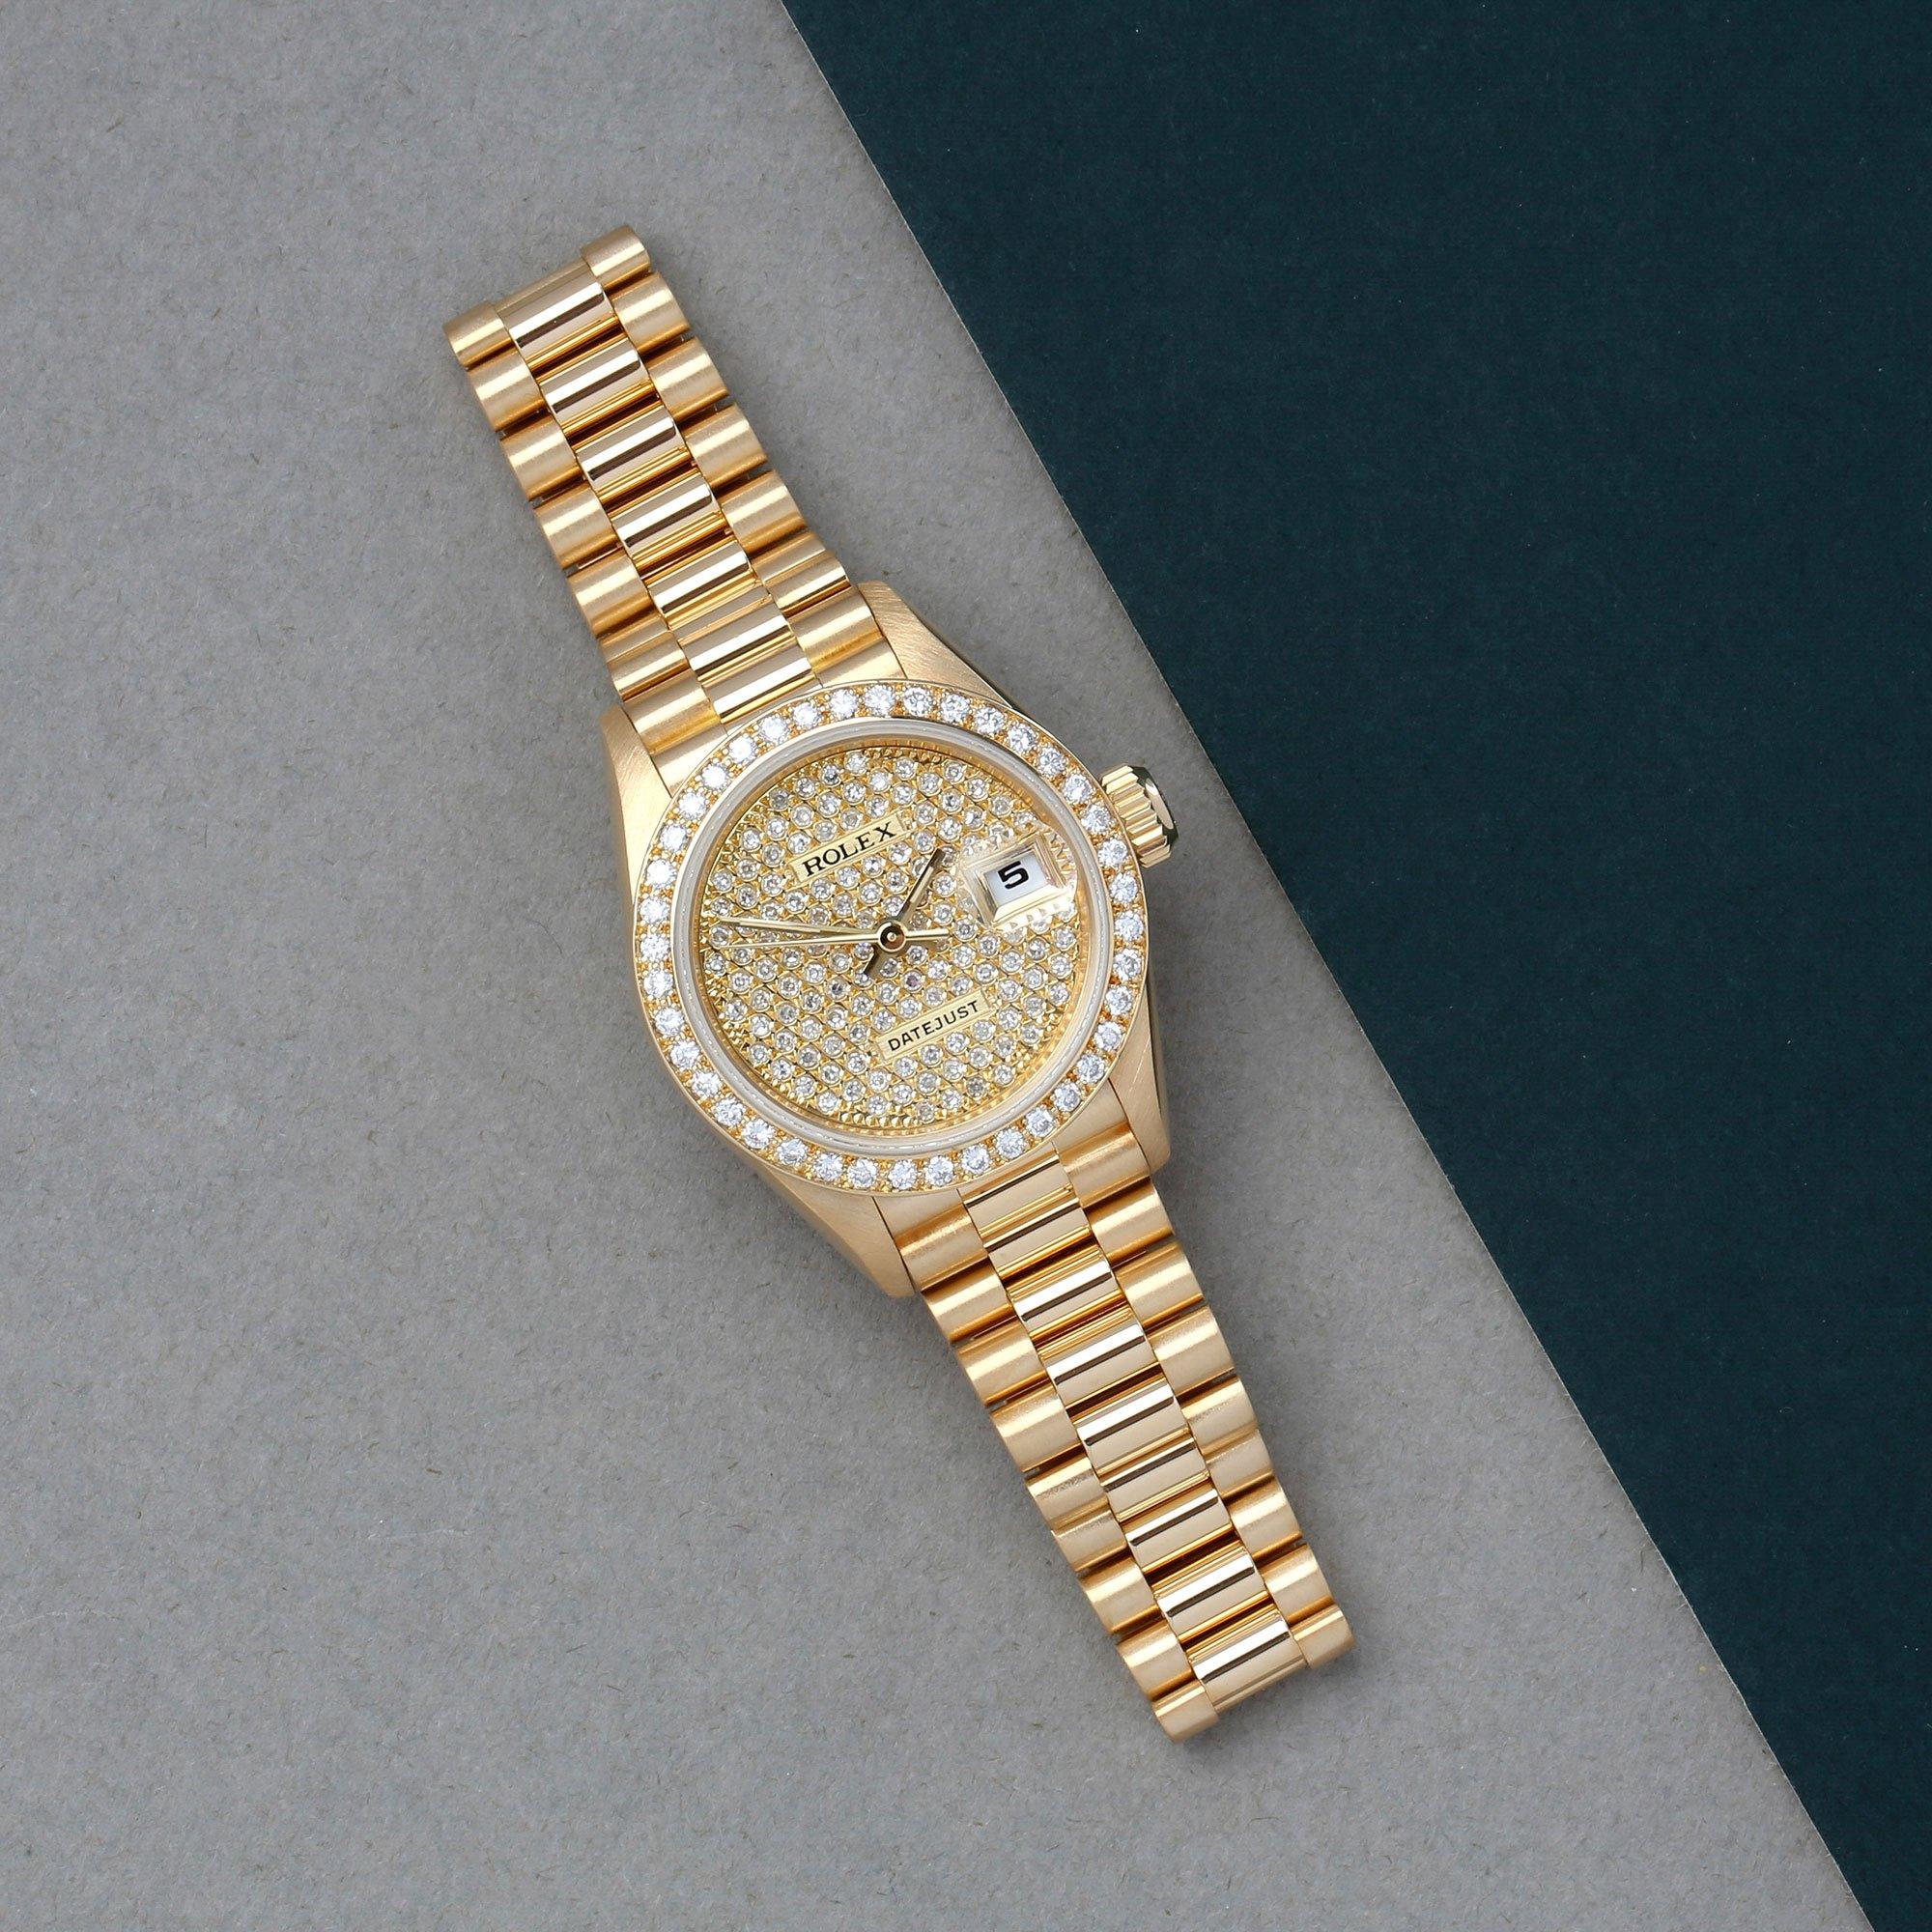 Xupes Reference: COM002655
Manufacturer: Rolex
Model: Datejust
Model Variant: 0
Model Number: 69178
Age: 1998
Gender: Ladies
Complete With: Rolex Service Pouch & Guarantee  
Dial: Gold Pave Diamond
Glass: Sapphire Crystal
Case Material: Yellow